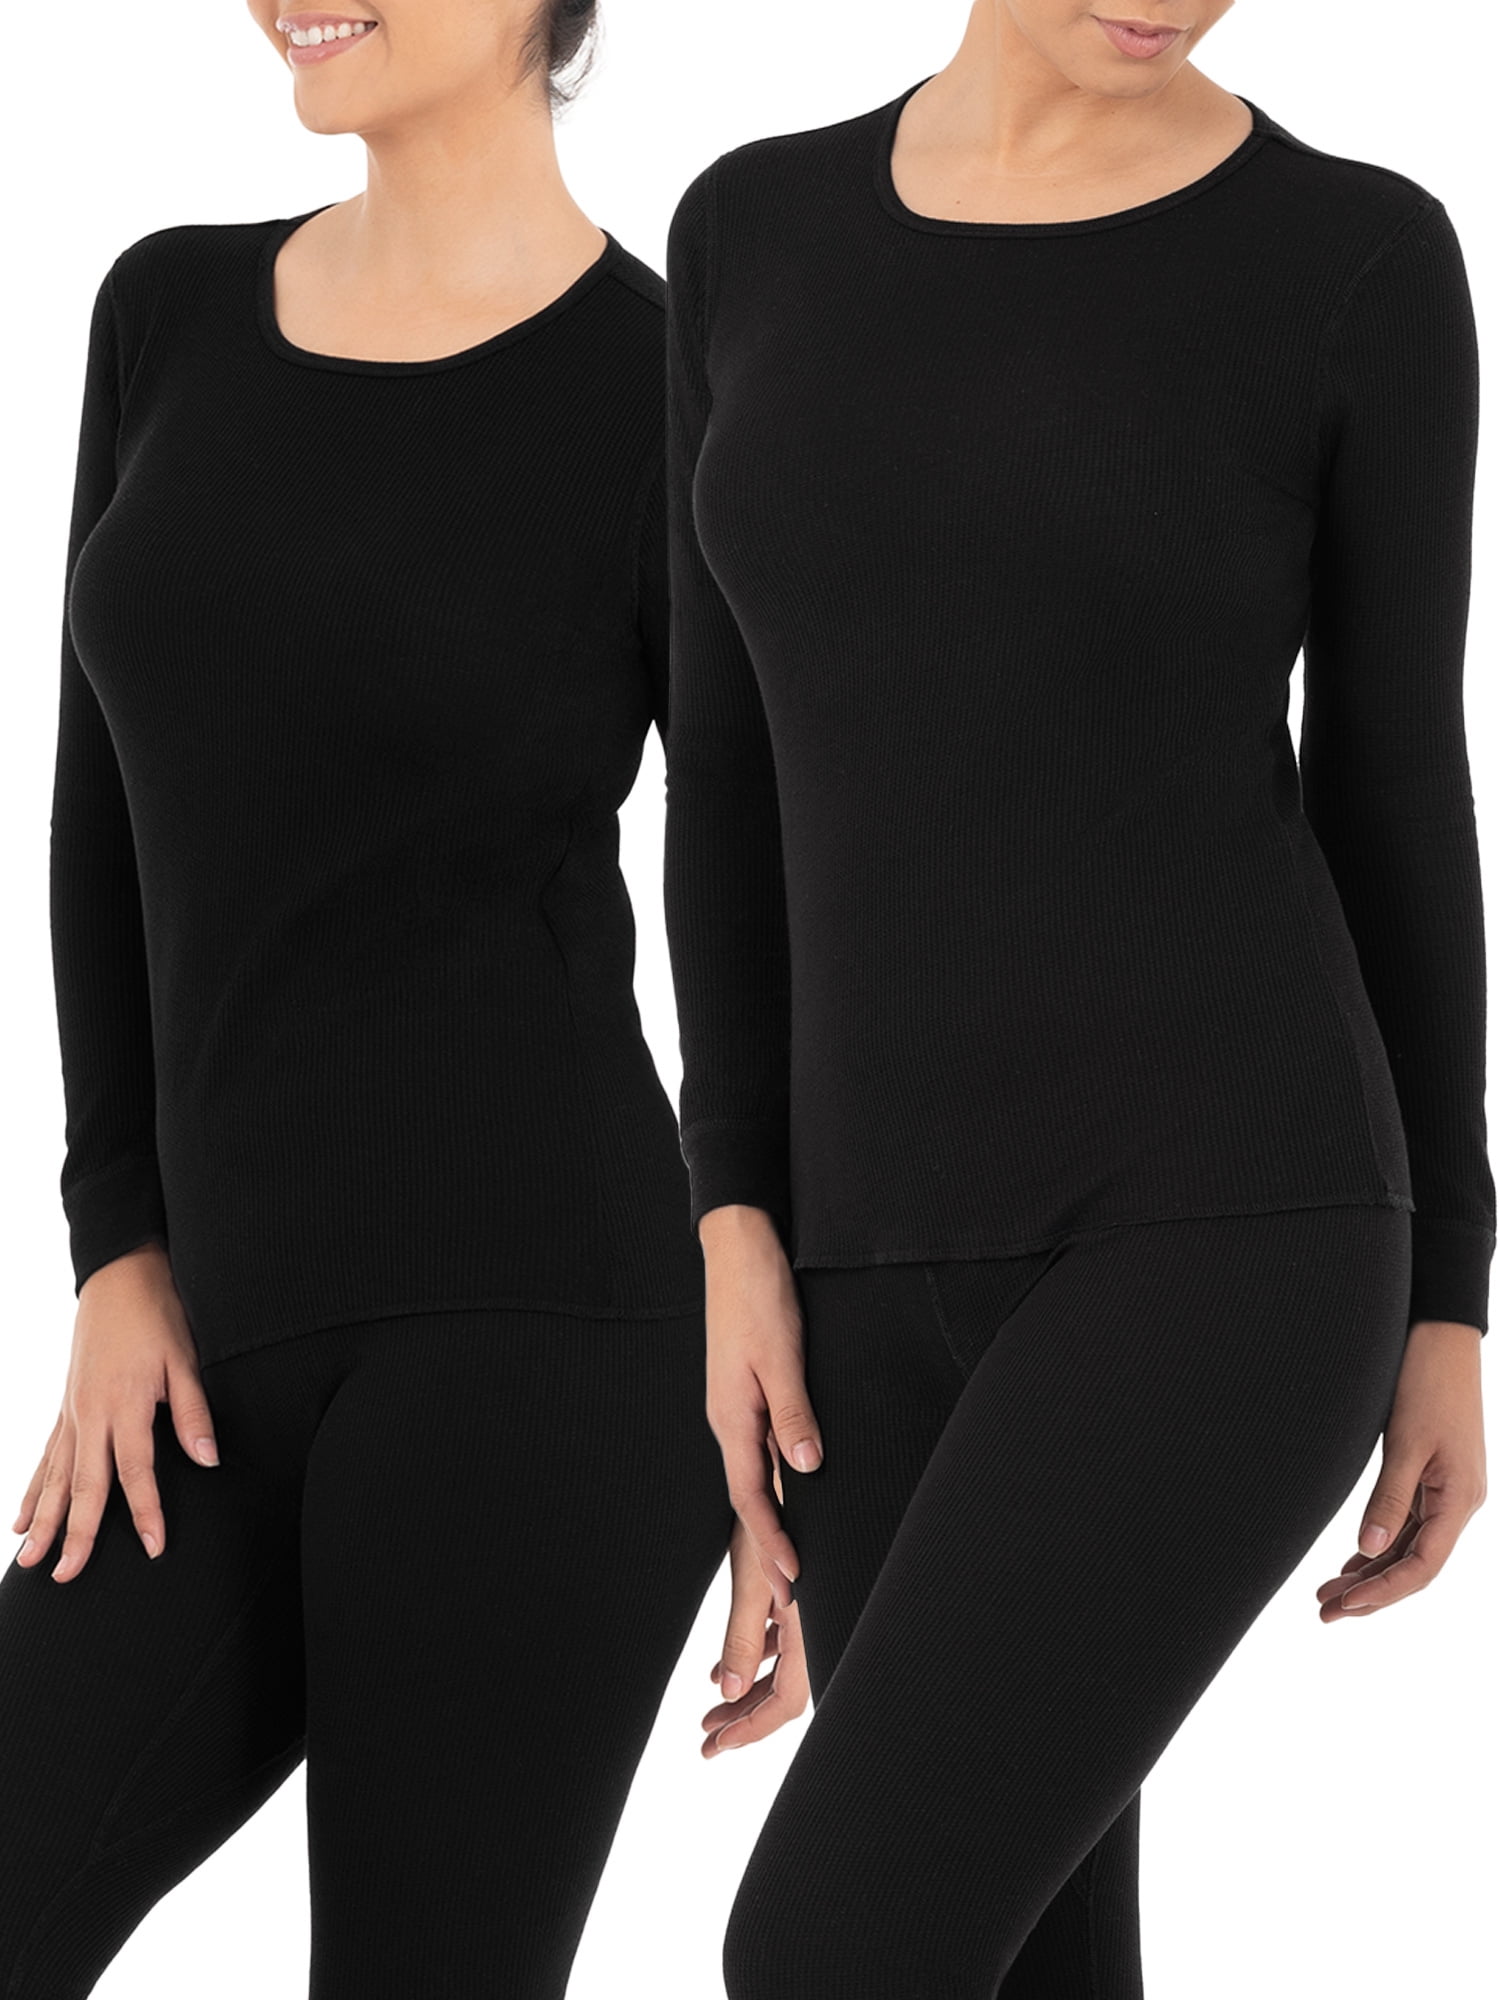 Fruit of the Loom Womens Core Performance Thermal Top 